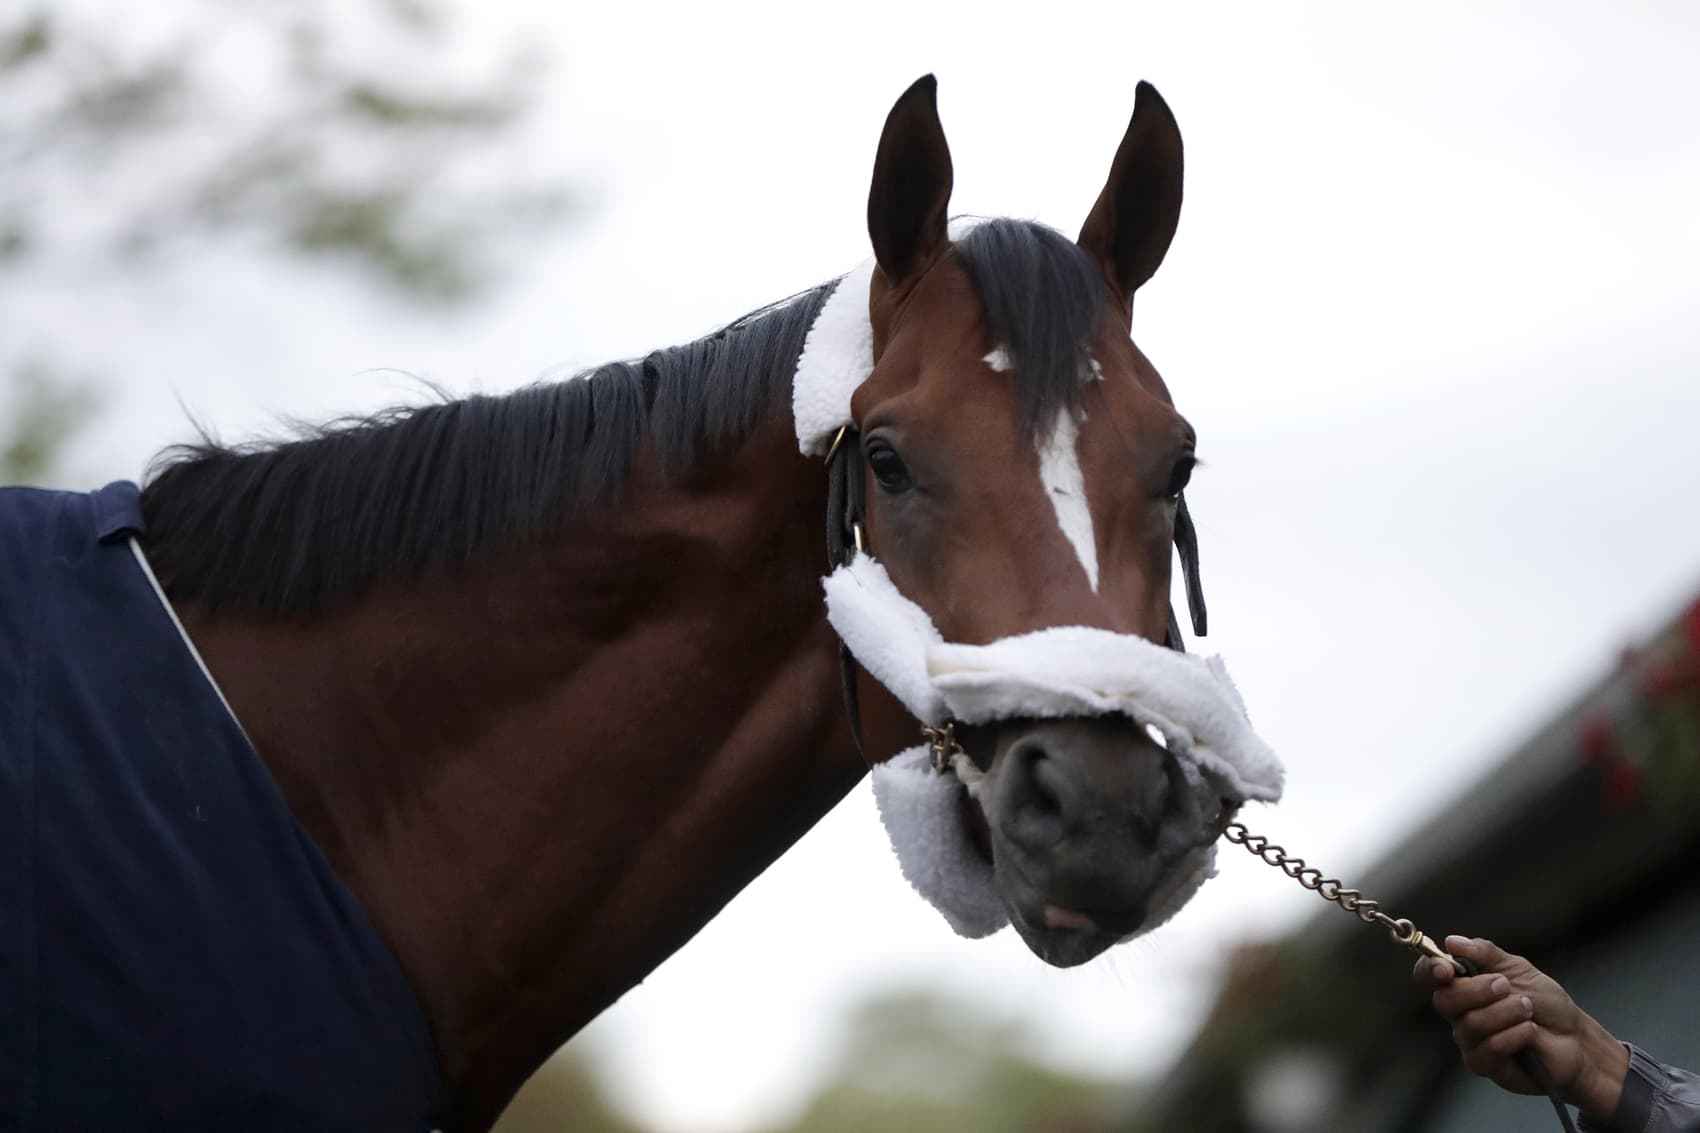 Maximum Security, the horse disqualified from the Kentucky Derby horse race, looks on after arriving at its home barn at Monmouth Park Racetrack, Tuesday, May 7, 2019, in Oceanport, N.J. (Julio Cortez/AP)